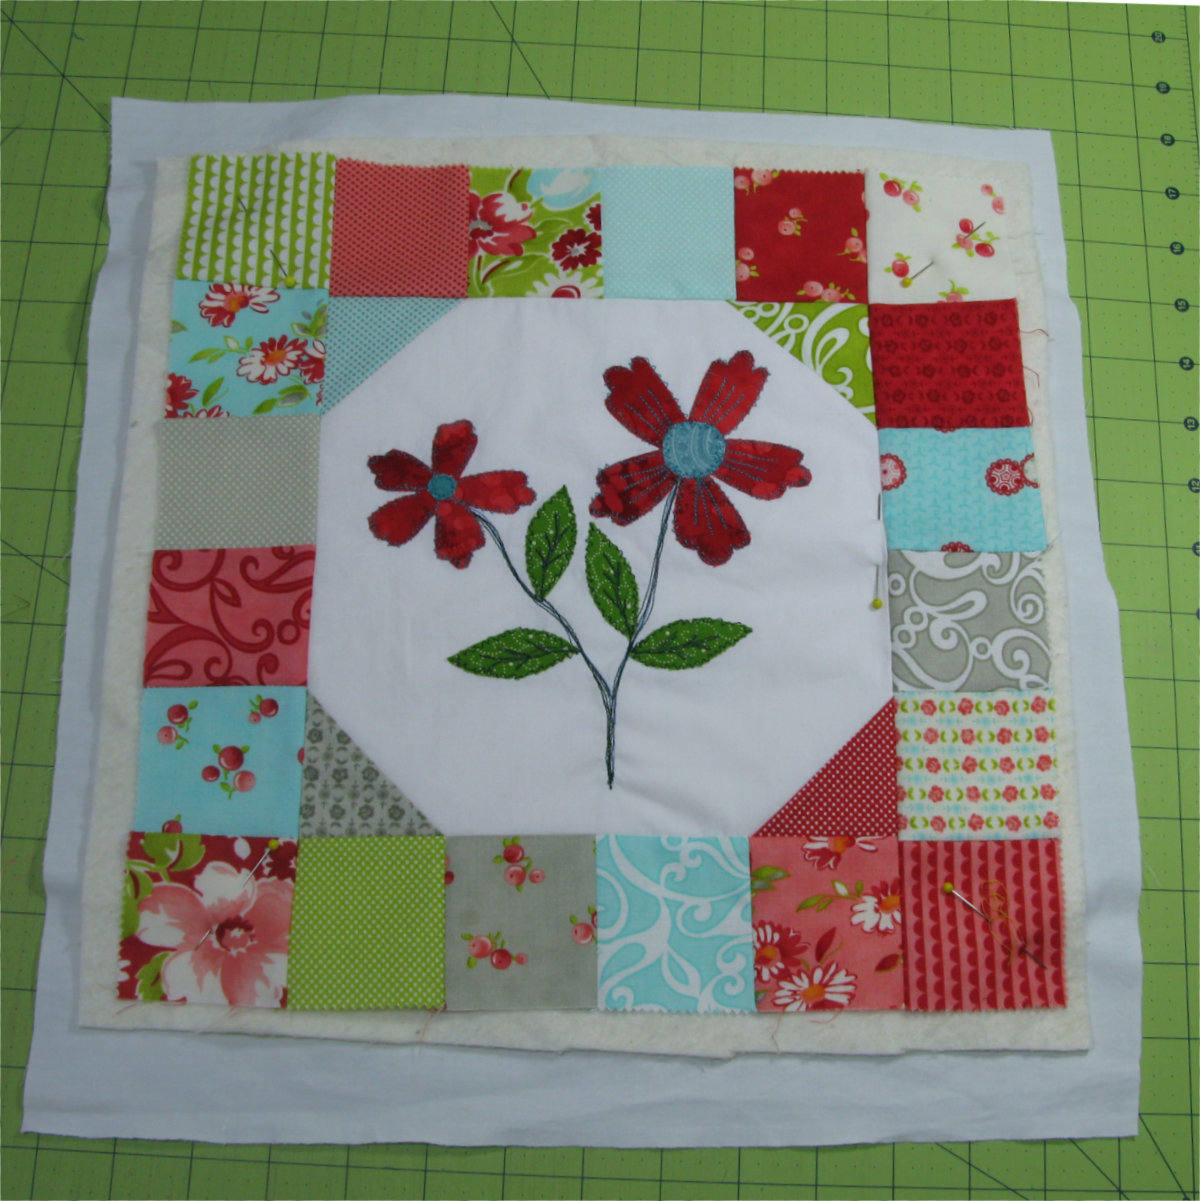 add batting and backing to quilt